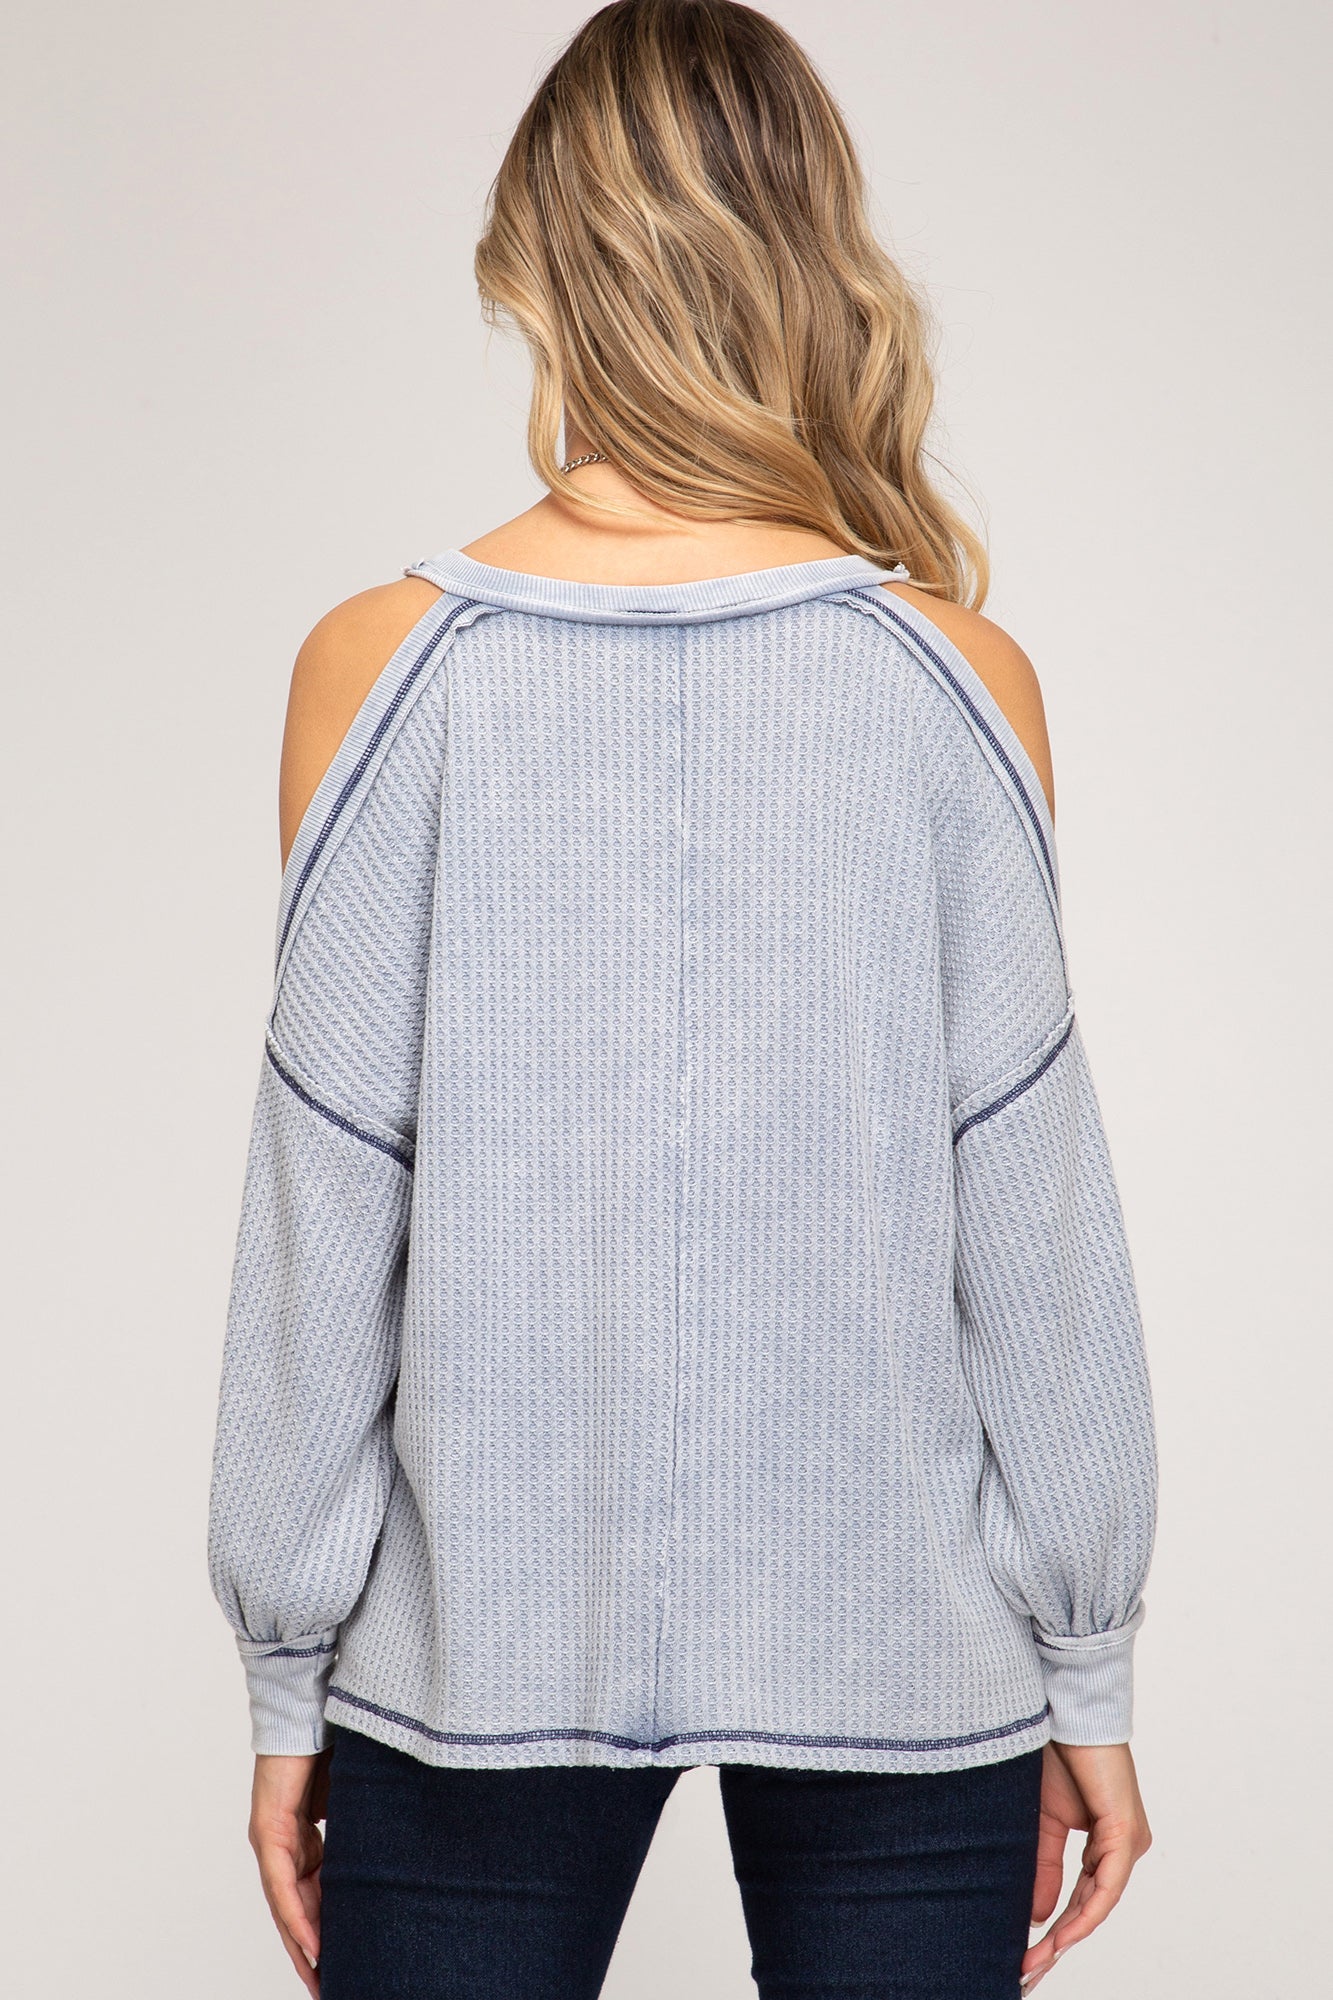 SS Long Sleeve Cold Shoulder Top!